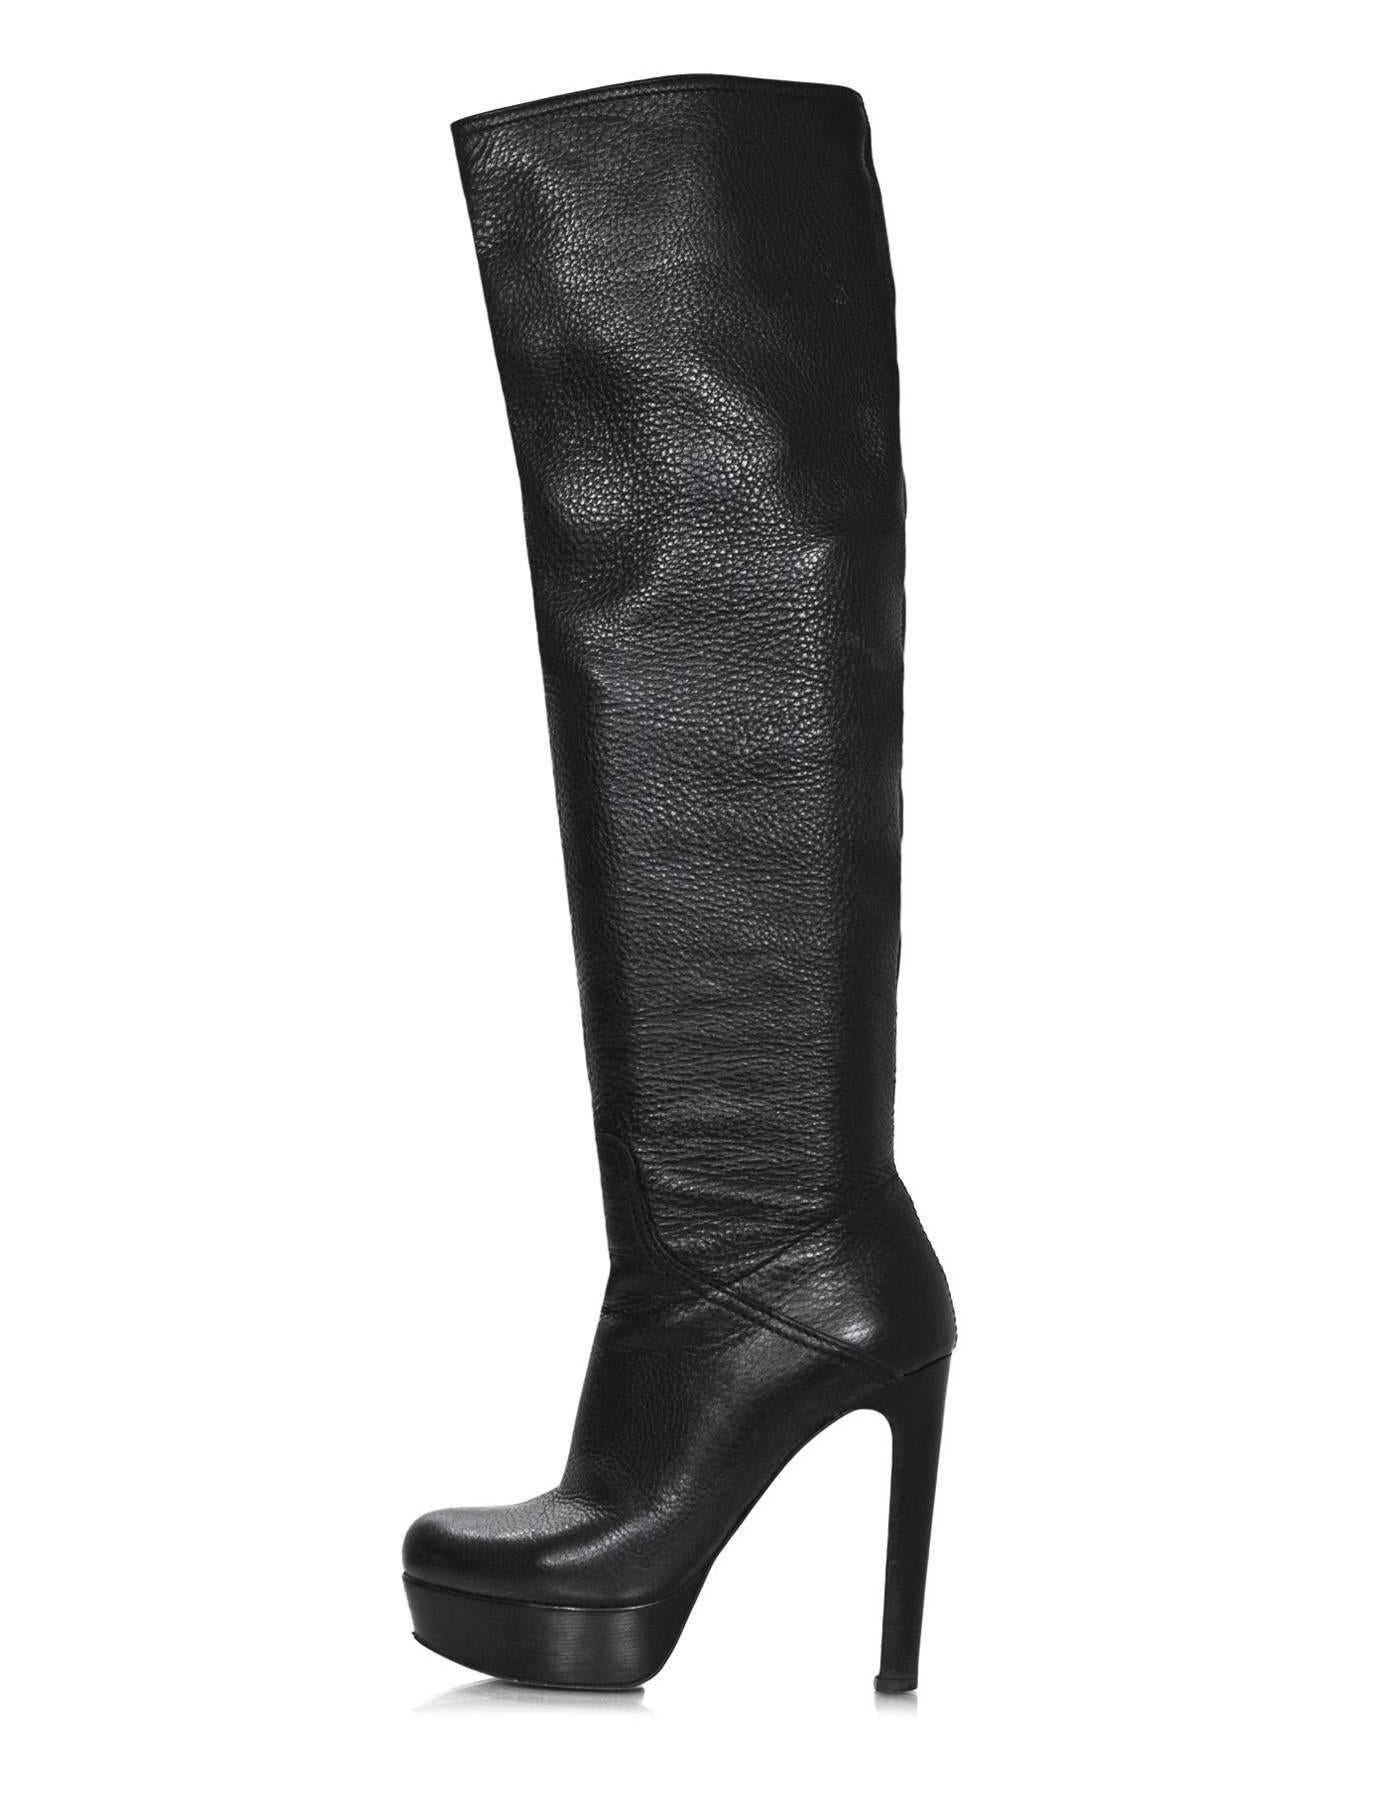 Miu Miu Black Leather Over The Knee Boots Sz 38
Features stirrup detail that can be removed

Made In: Italy
Color: Black
Materials: Leather, metal
Closure/Opening: Slide on with partial side zipper
Sole Stamp: Miu Miu Made Italy 38
Overall